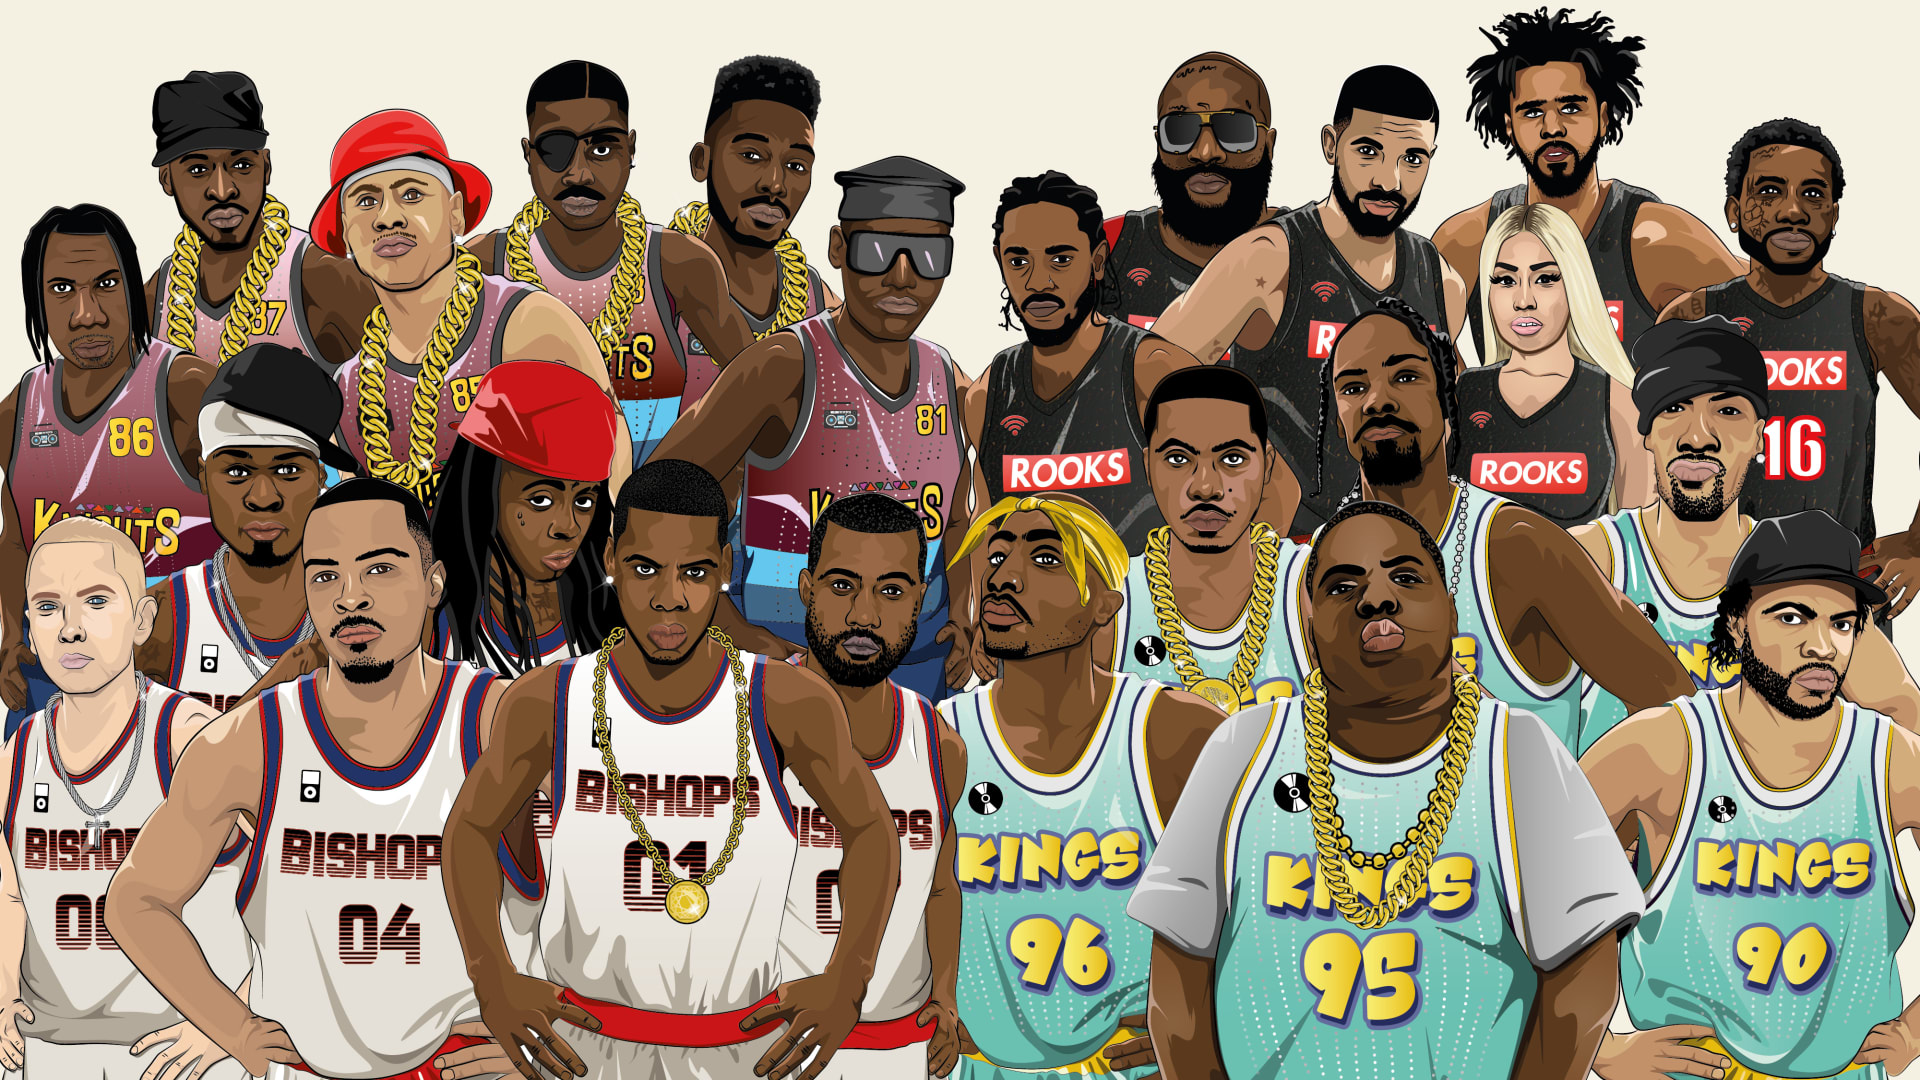 Engineering The Ultimate Rap Superteam Every Decade to Present